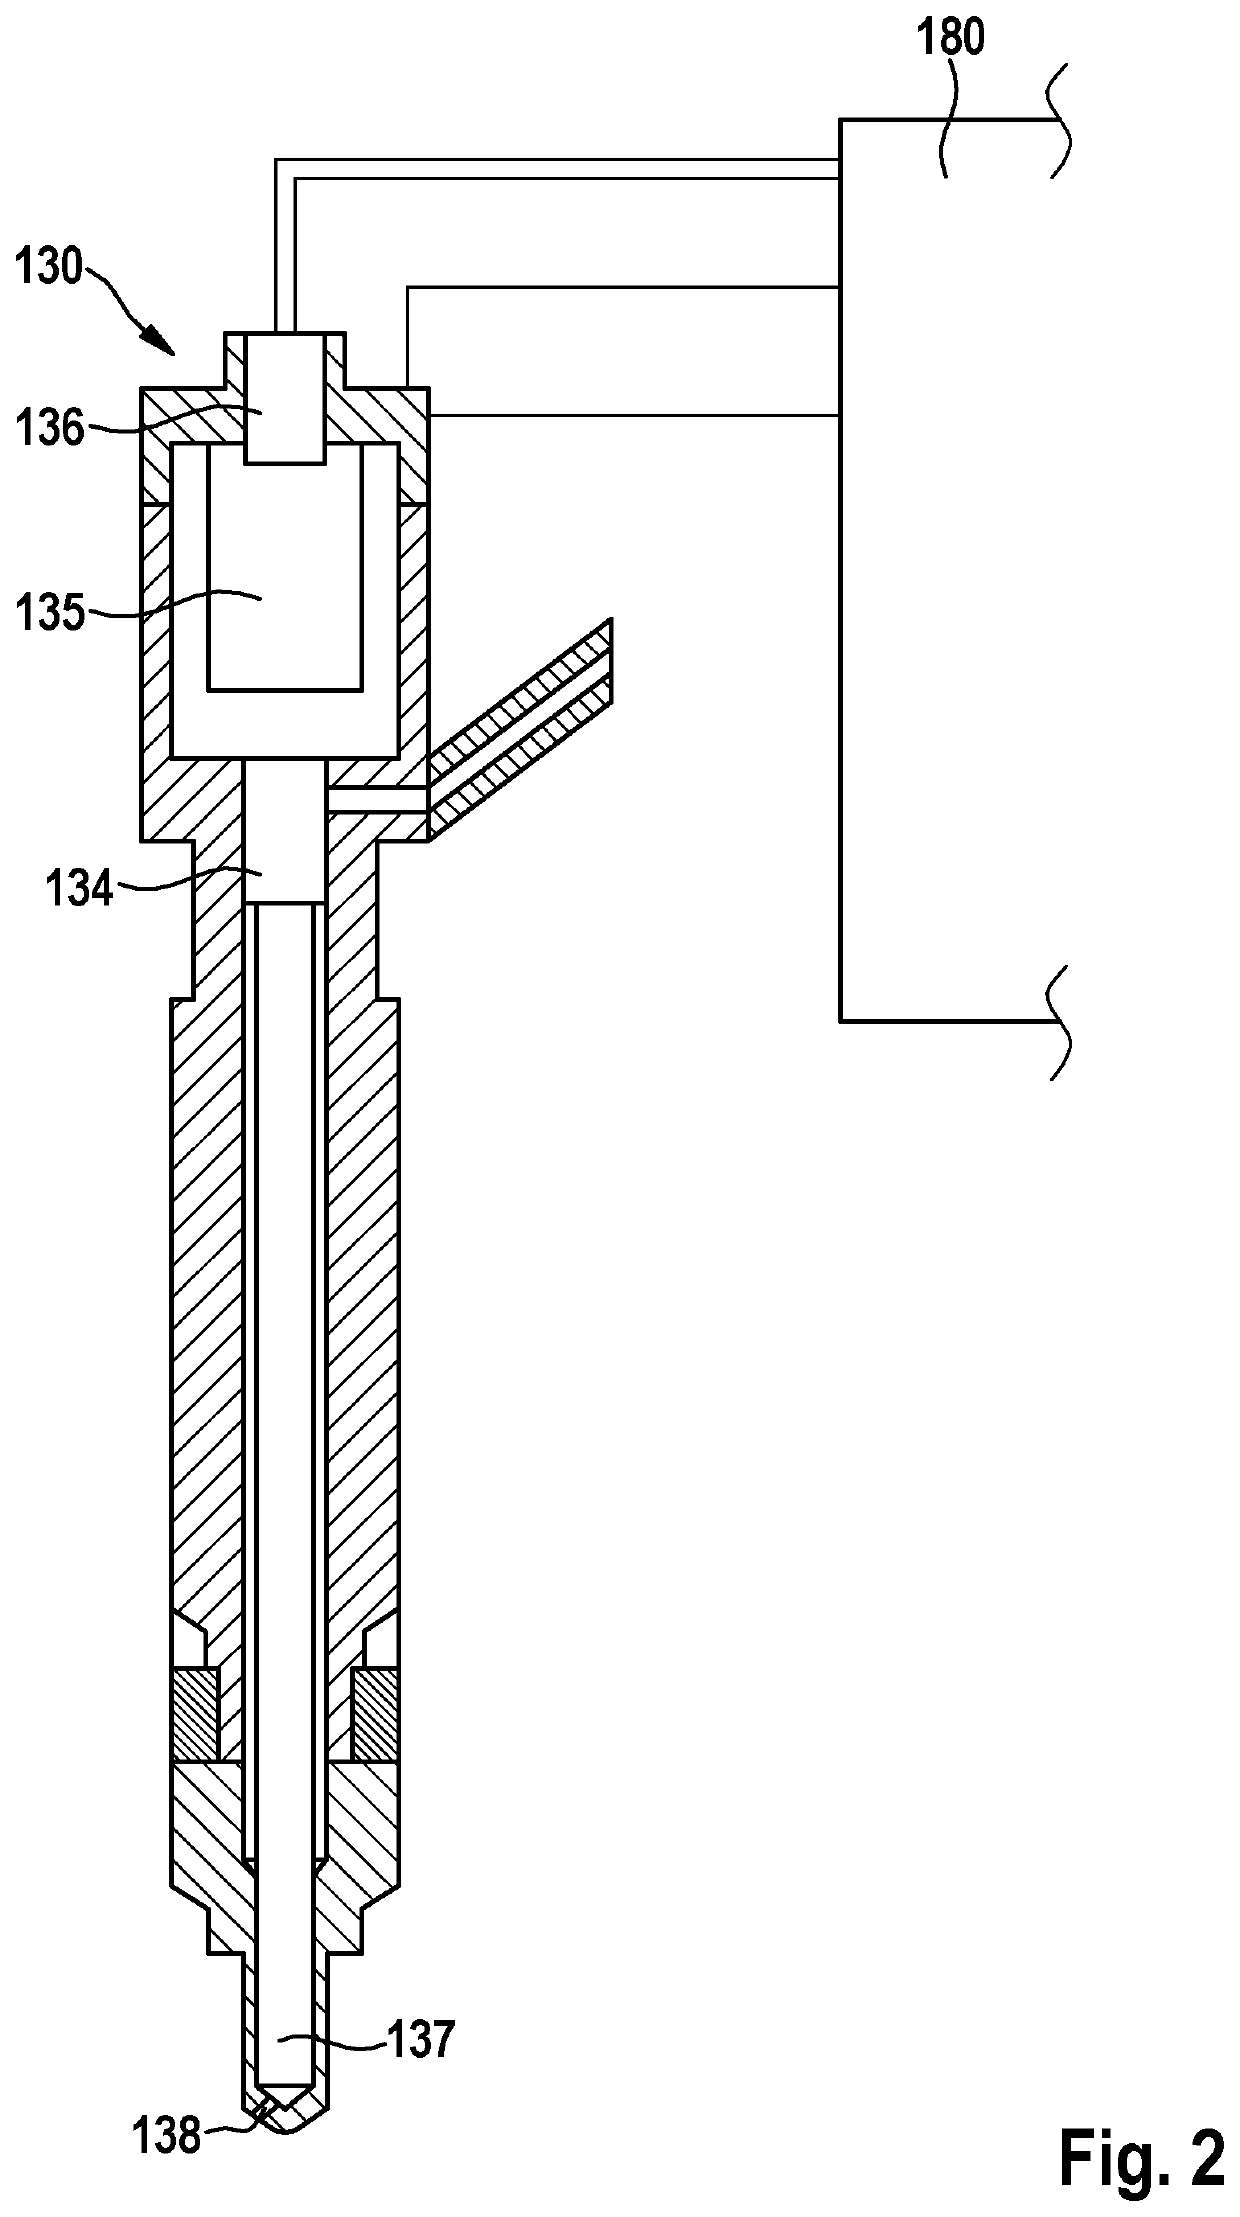 Method for ascertaining a variable characterizing a flow rate of a fuel injector